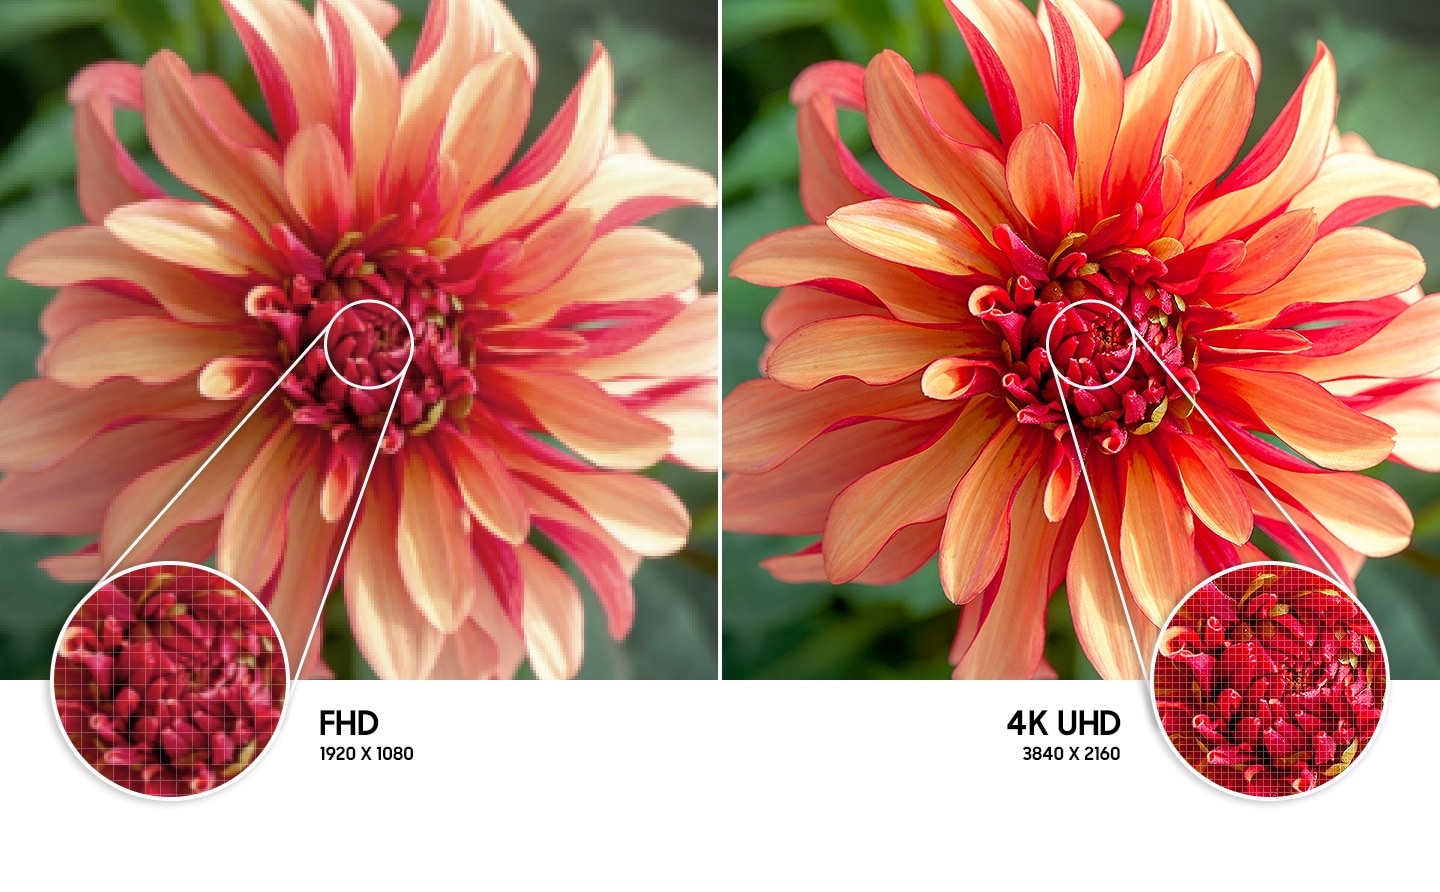 The flower image on the right compared to the left shows higher quality picture resolution created by 4K UHD technology.